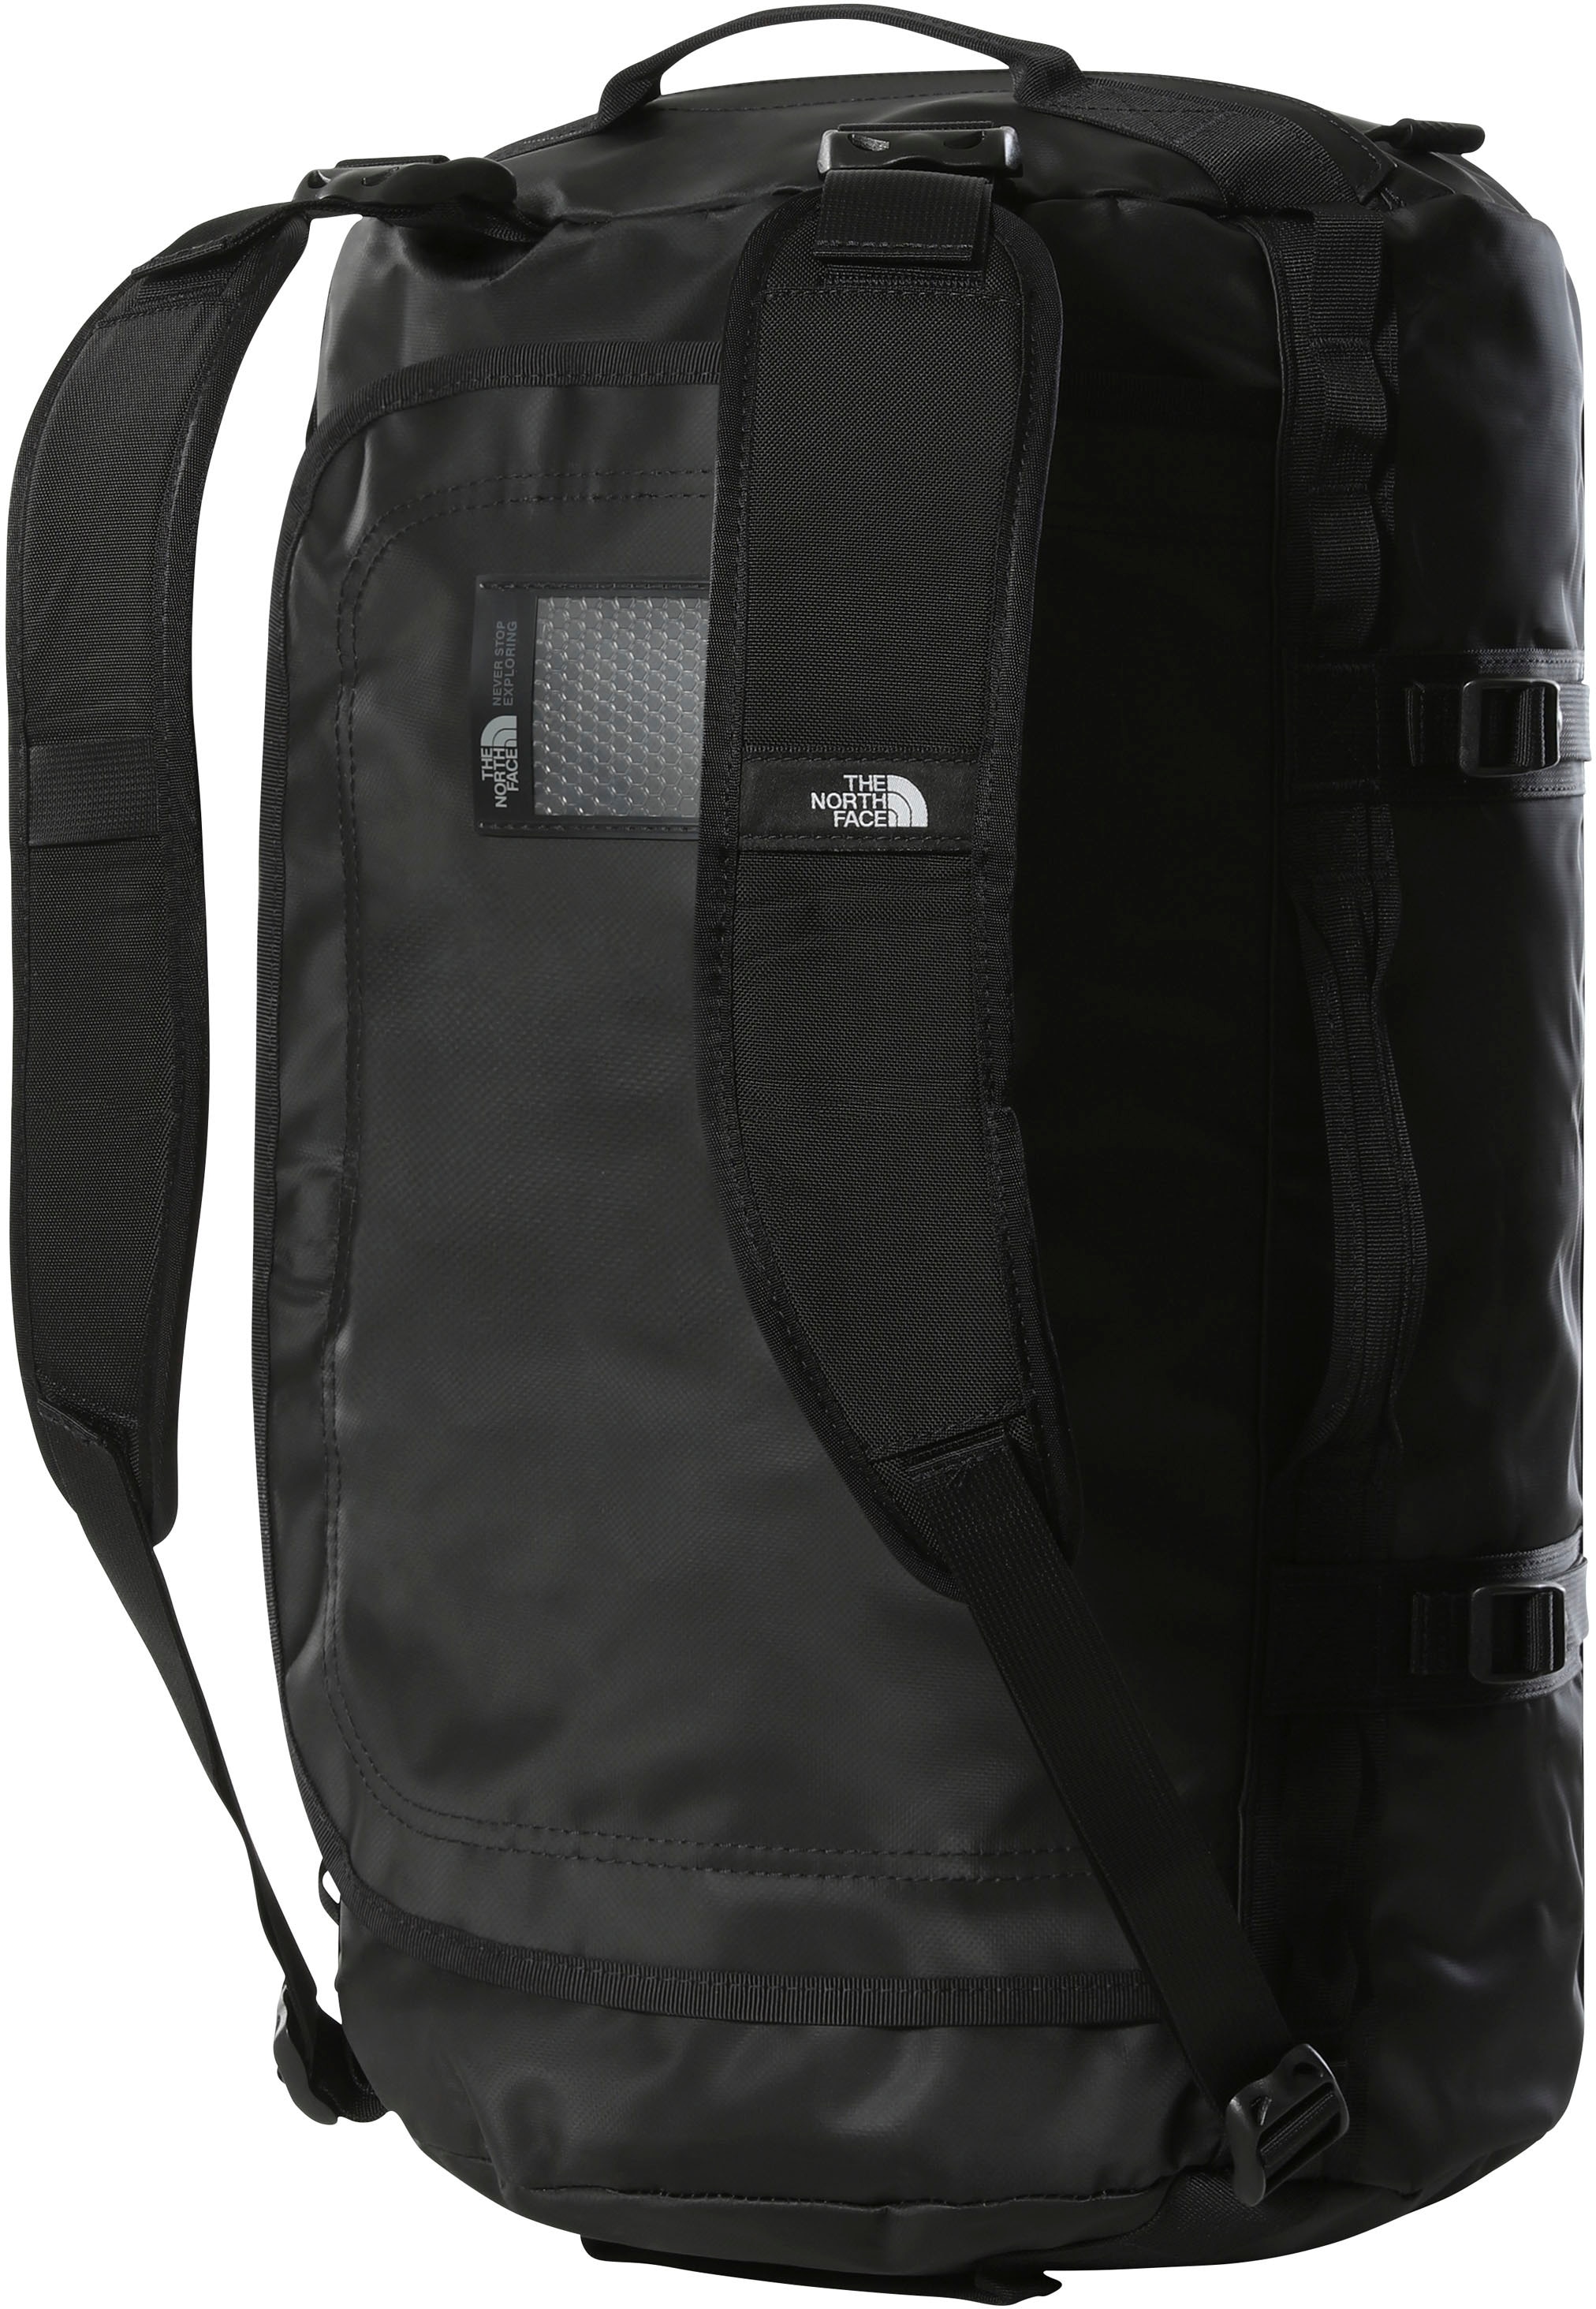 The North Face Reisetasche »BASE CAMP DUFFEL - S«, (1 tlg.), mit Logolabel